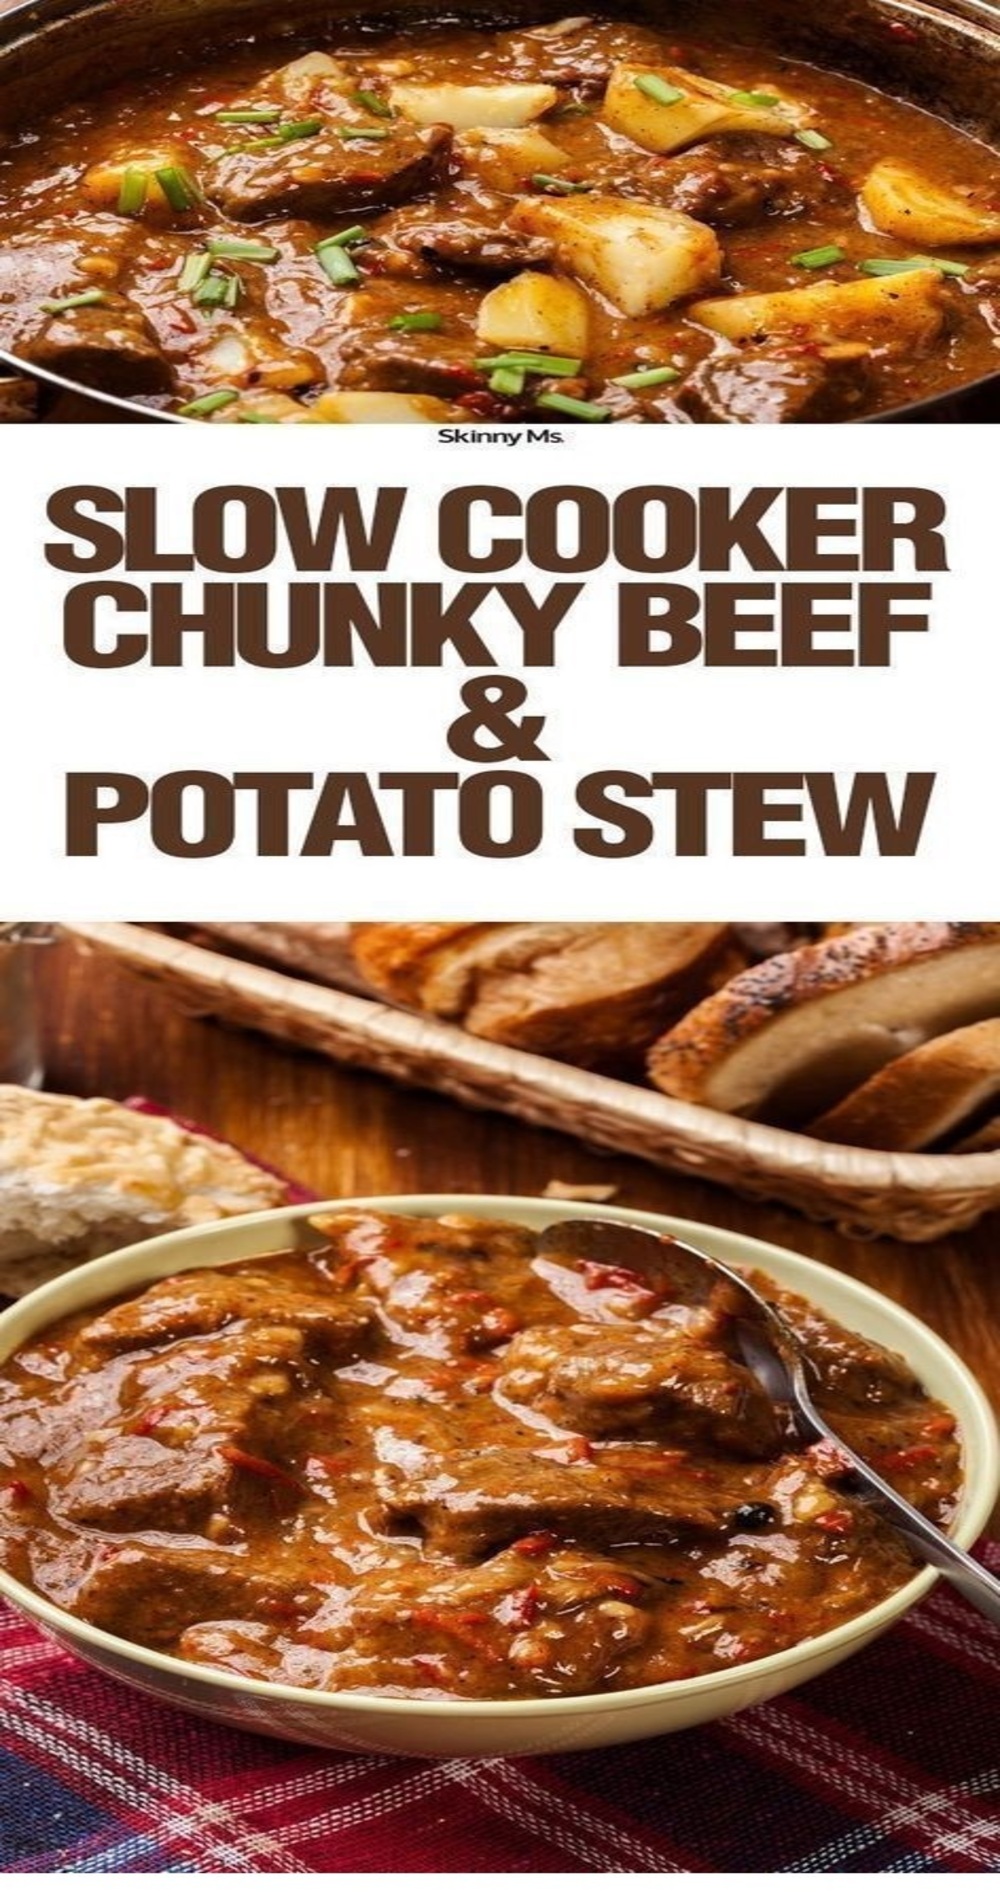 Slow Cooker Thick & Chunky Beef Stew Recipe